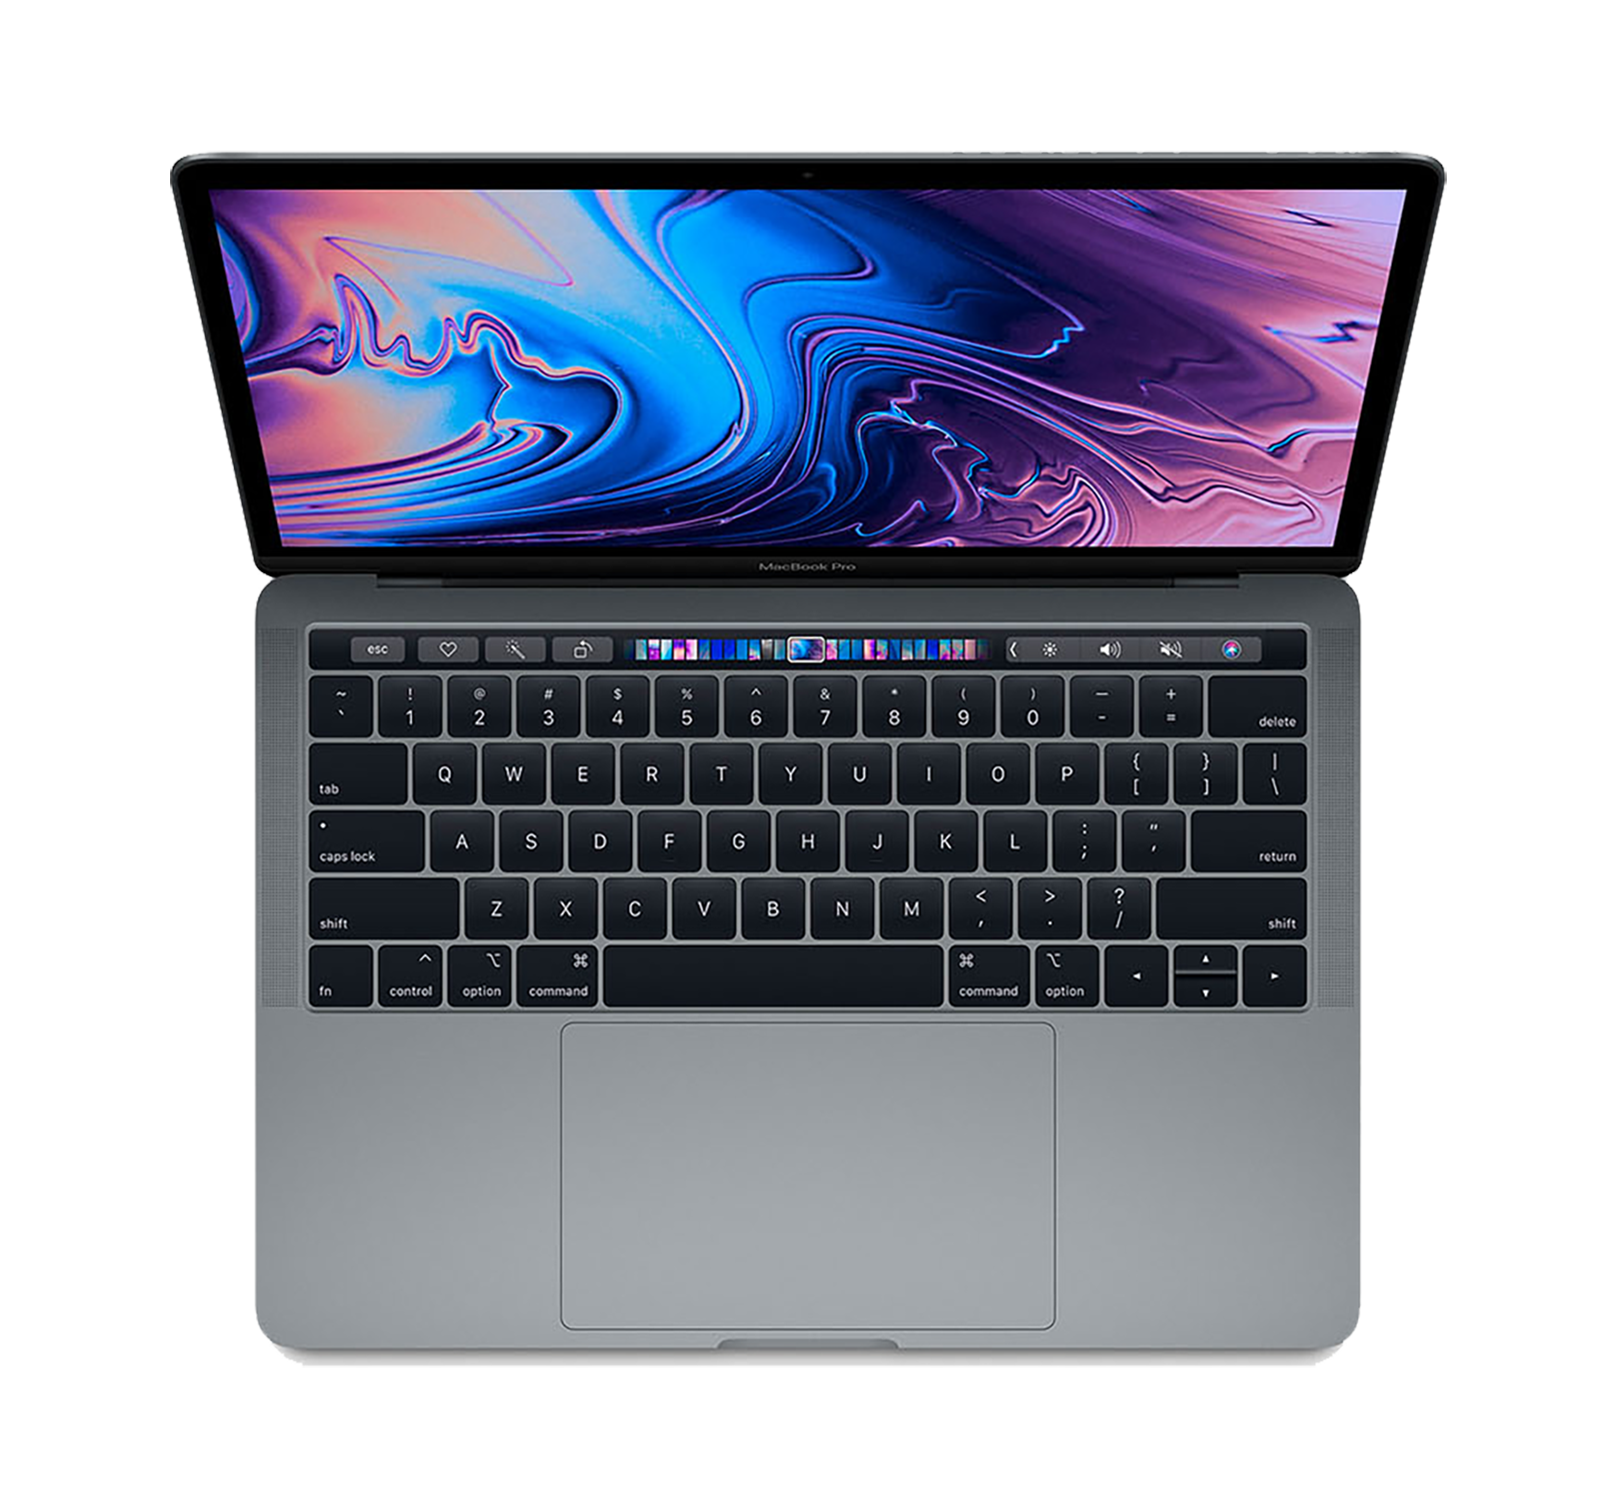 Apple MacBook Pro 13 Inch Price Guide MV962LL/A - Coupons, Deals 